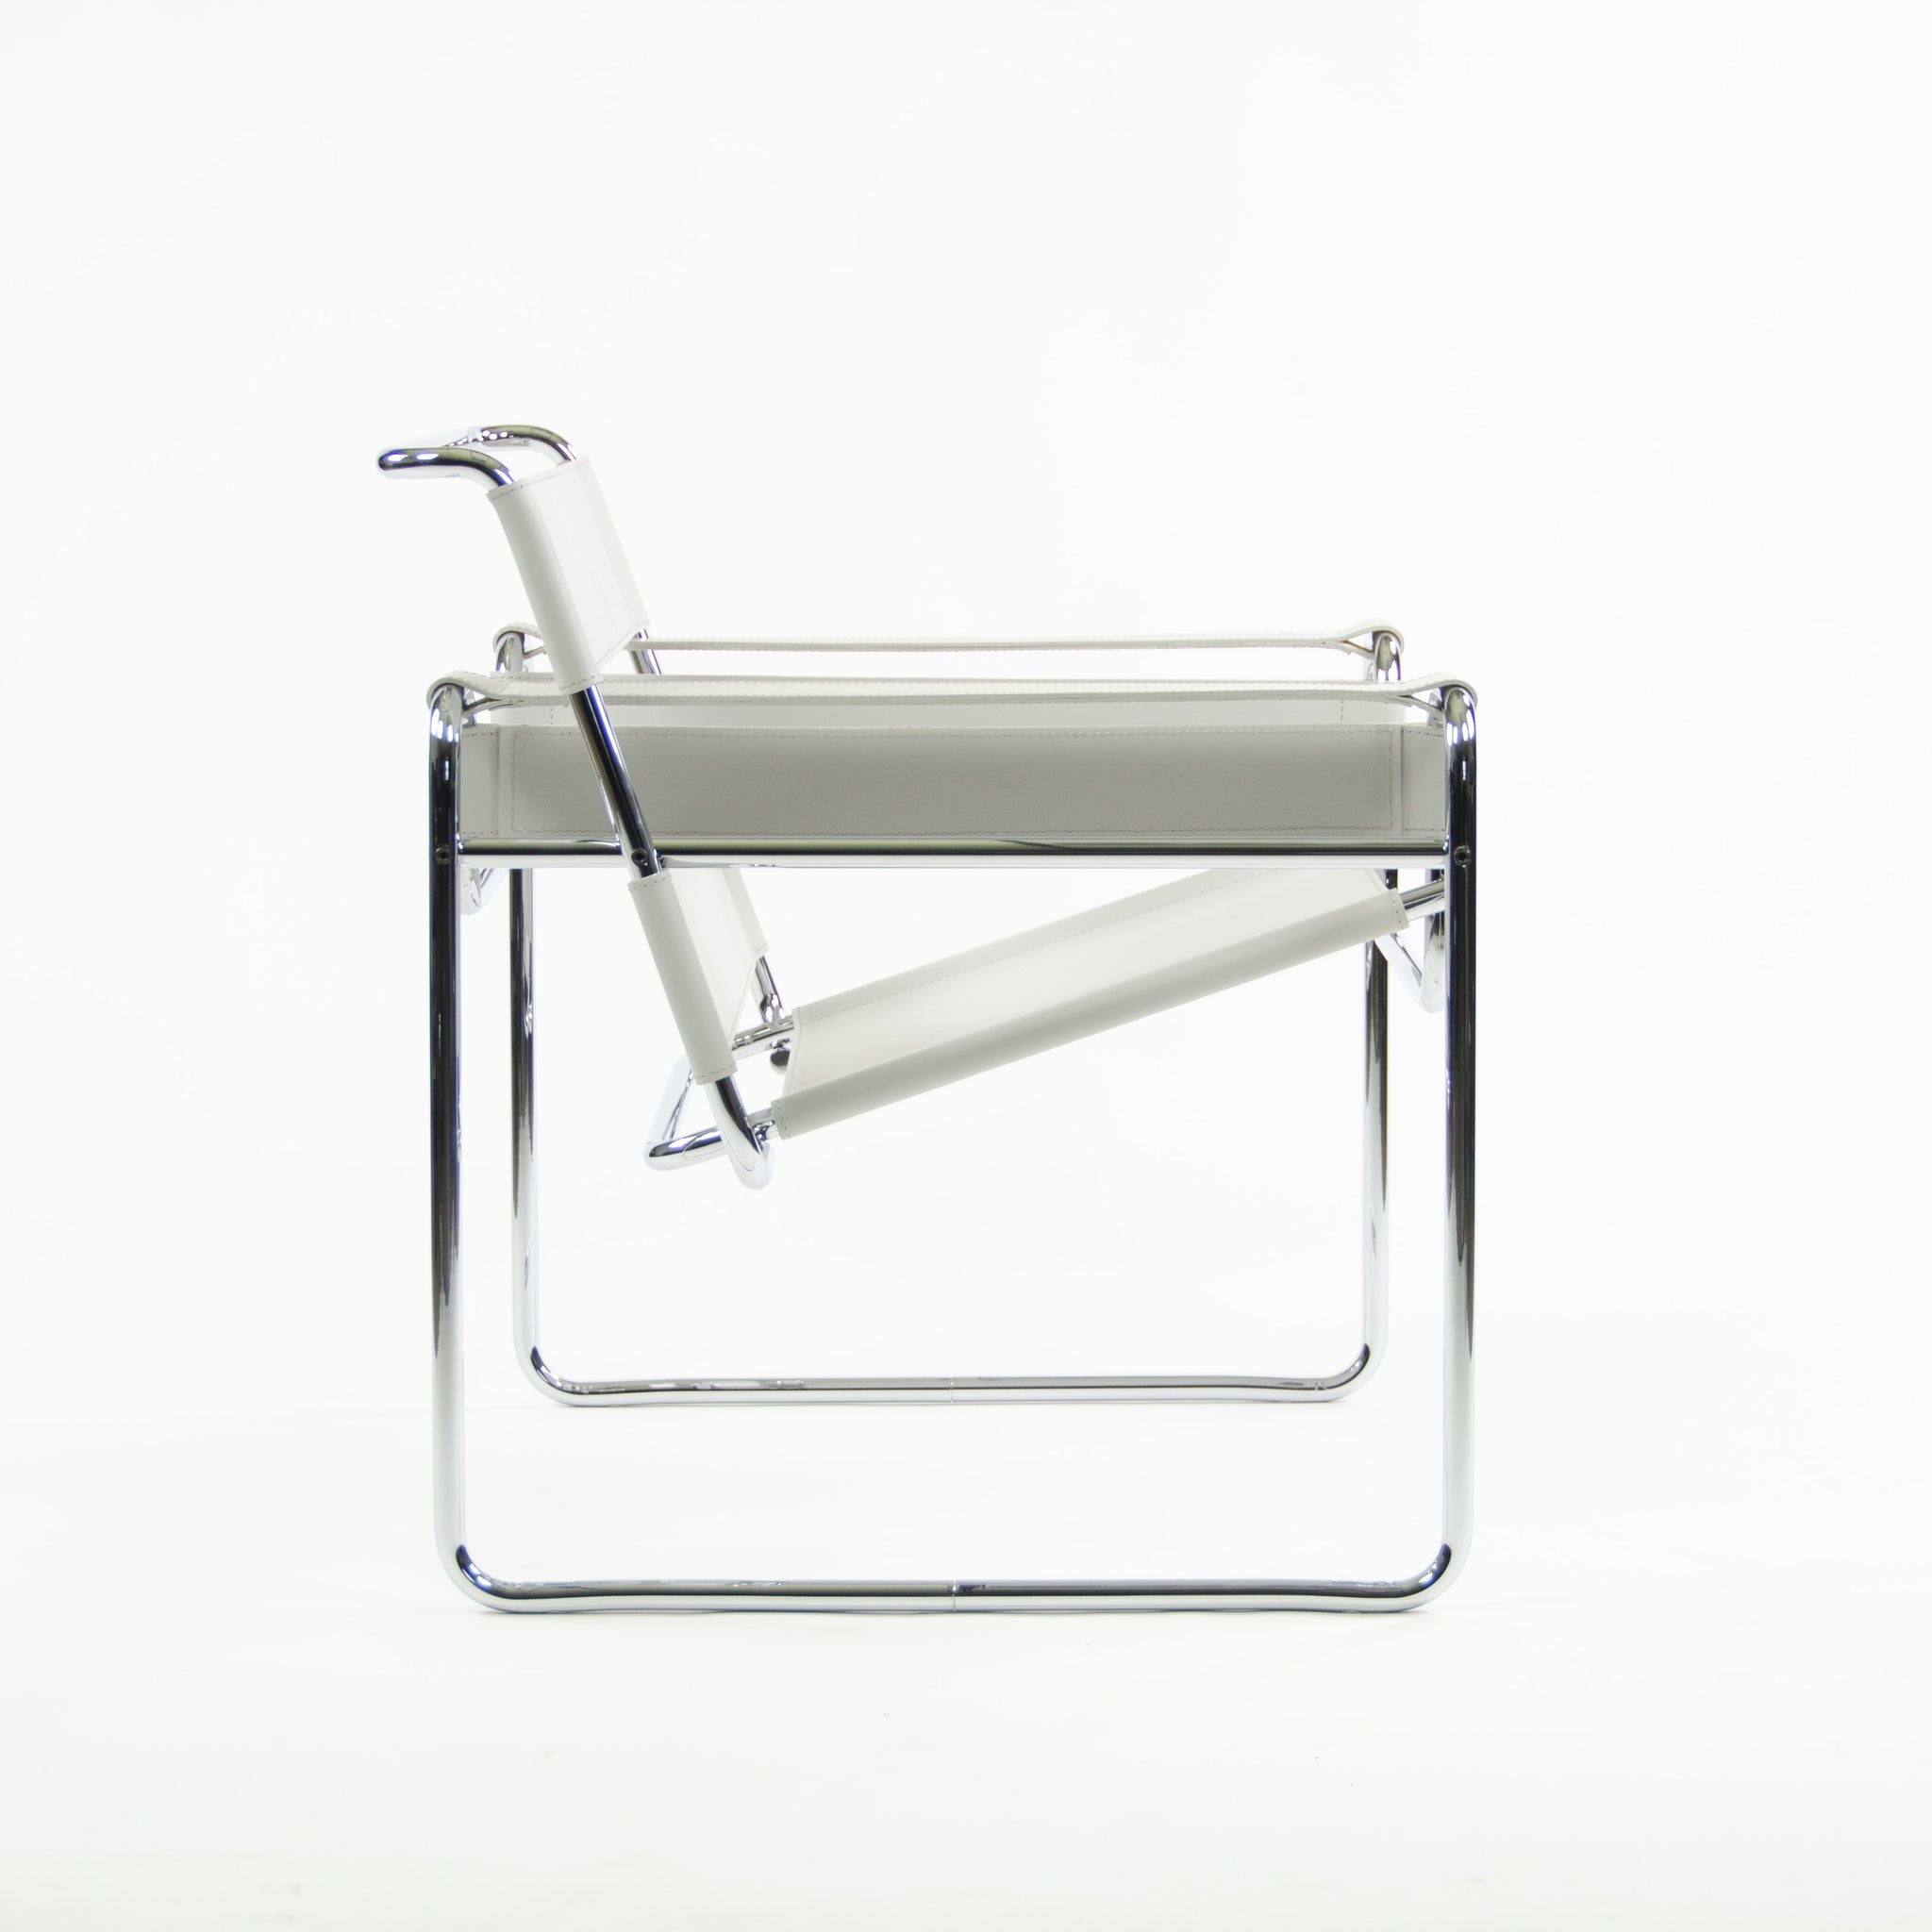 SOLD Brand New In Box Knoll Marcel Breuer Wassily Chair B3 White Leather 2x